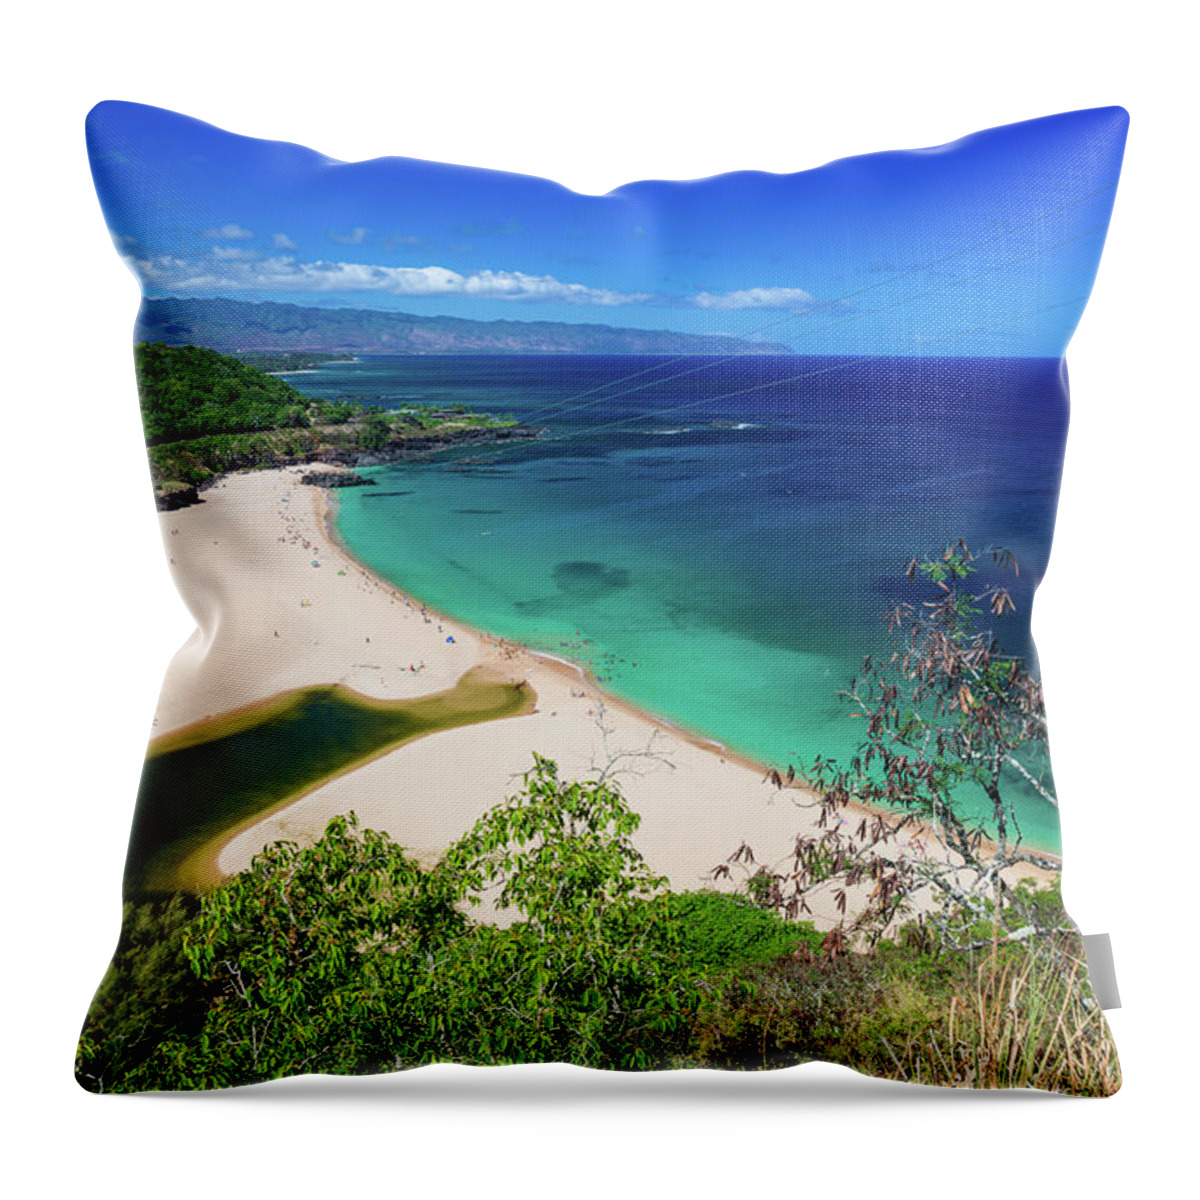 Tranquility Throw Pillow featuring the photograph Waimea Bay Overlook by J. Andruckow